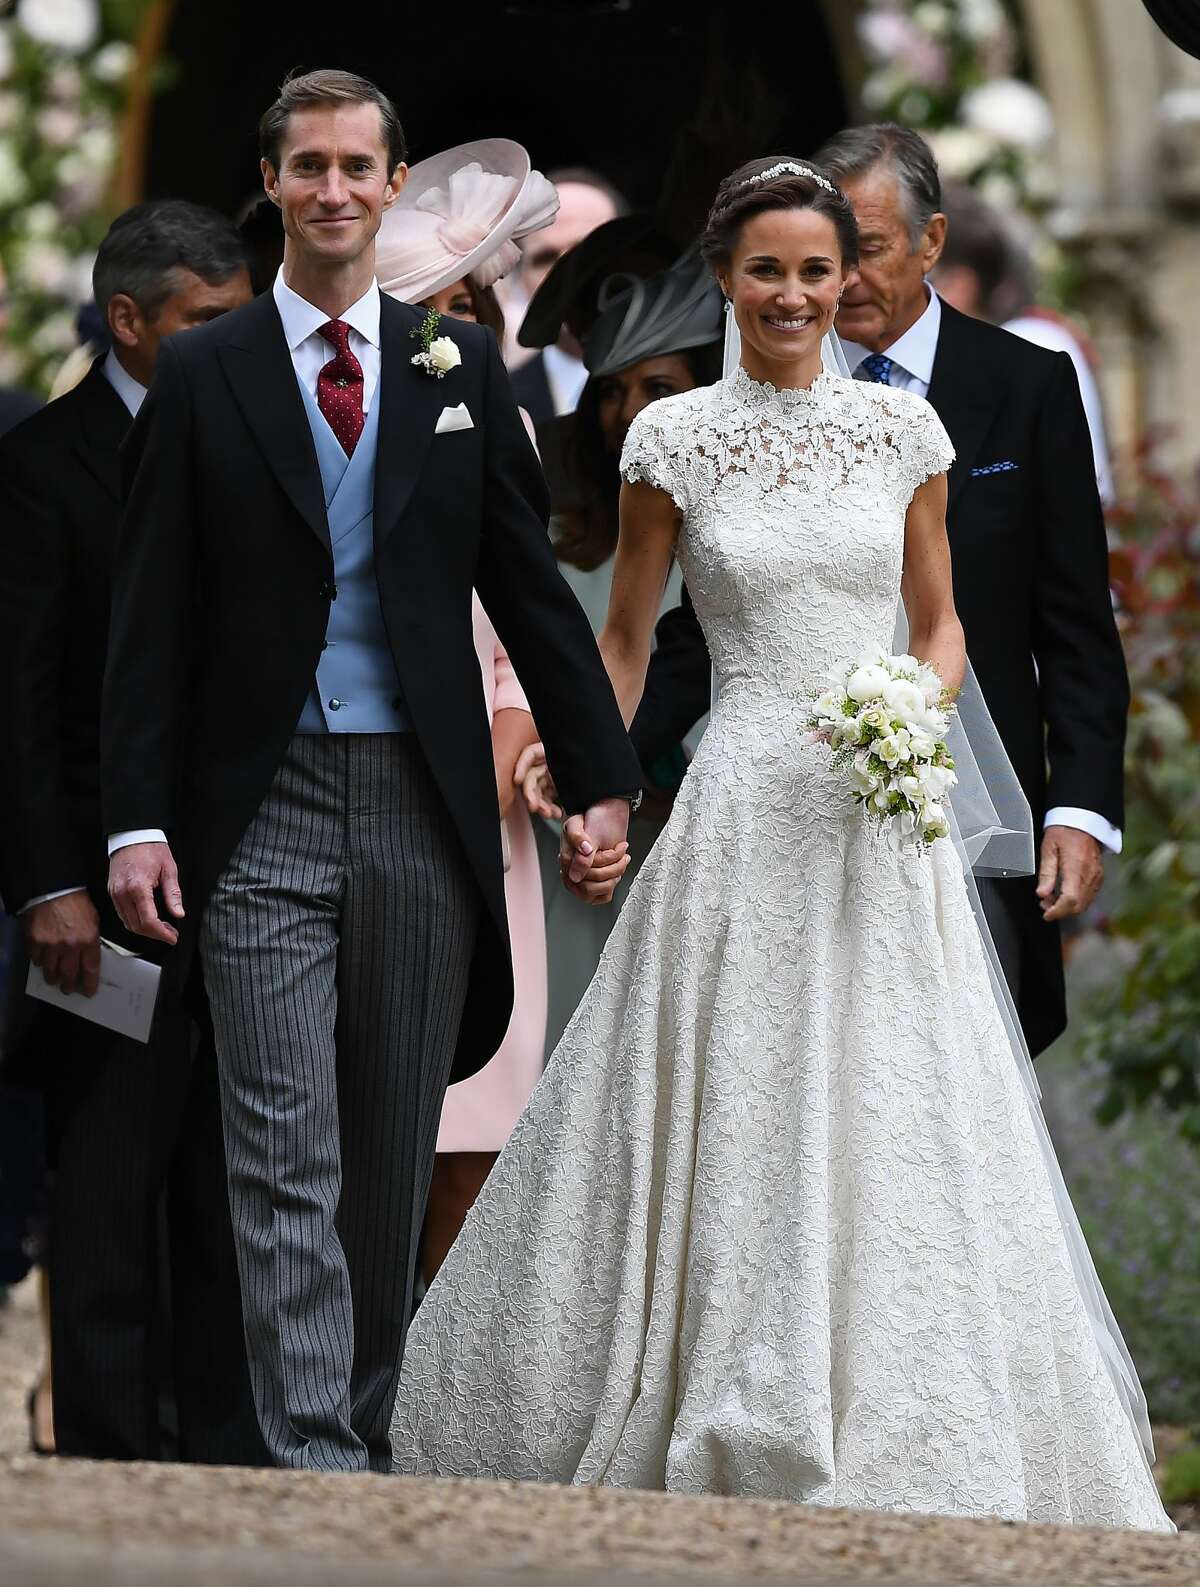 Pippa Middleton and her new husband James Matthews leave church following their wedding ceremony at St Mark's Church as the bridesmaids and pageboys walk ahead on May 20, 2017 in Englefield Green, England.